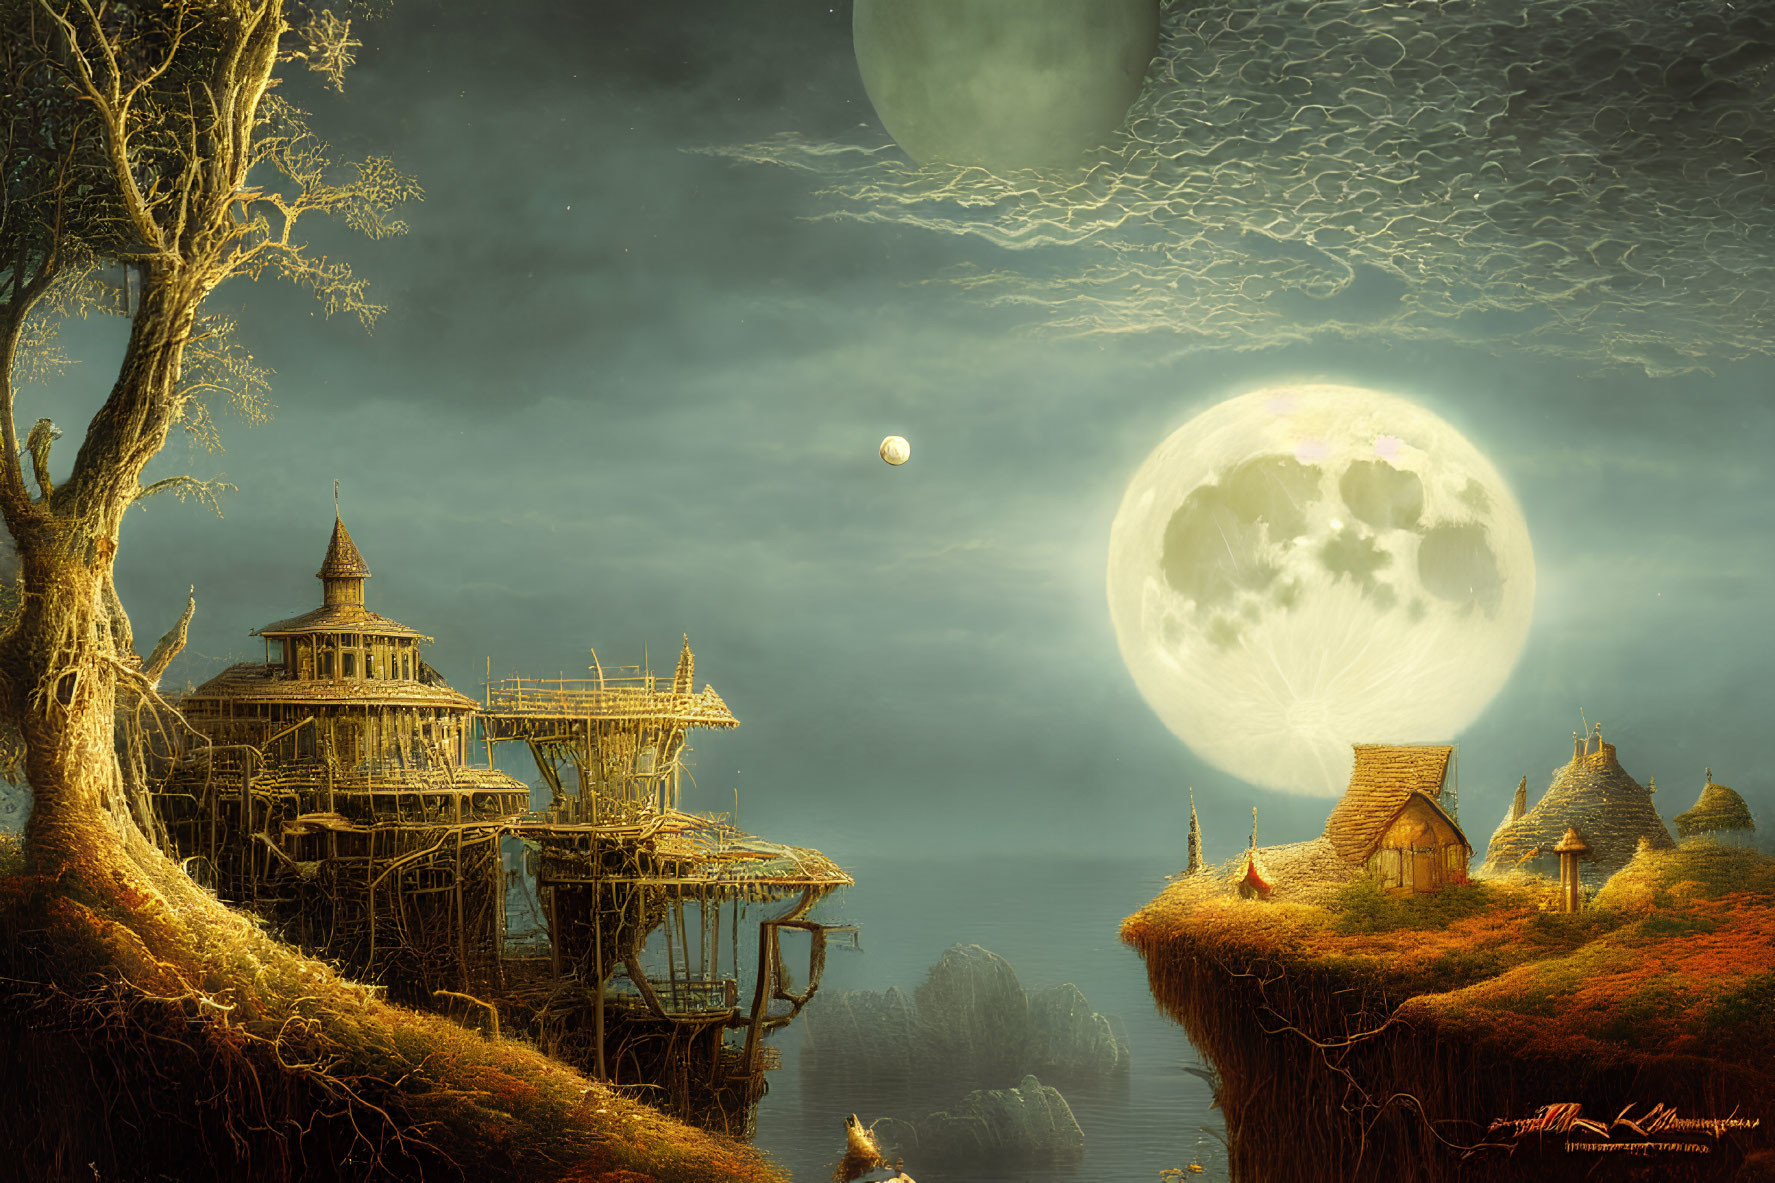 Ethereal fantasy landscape with treehouses and traditional huts under moons